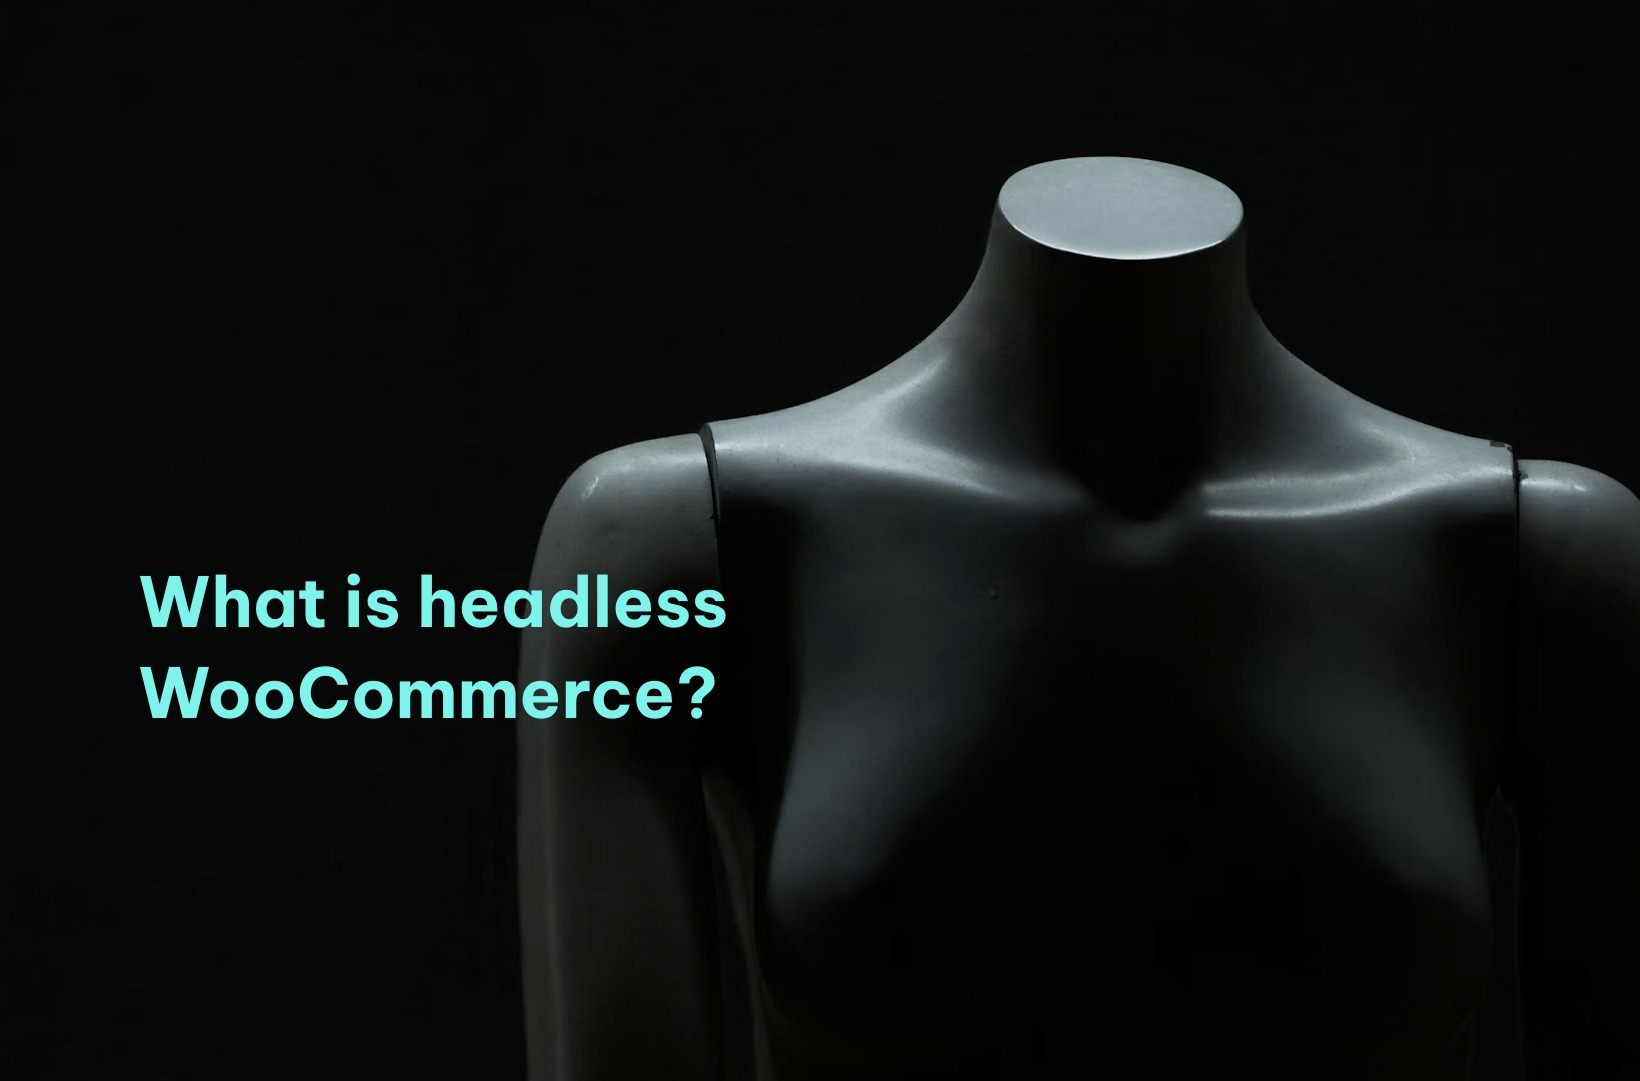 What is headless WooCommerce?